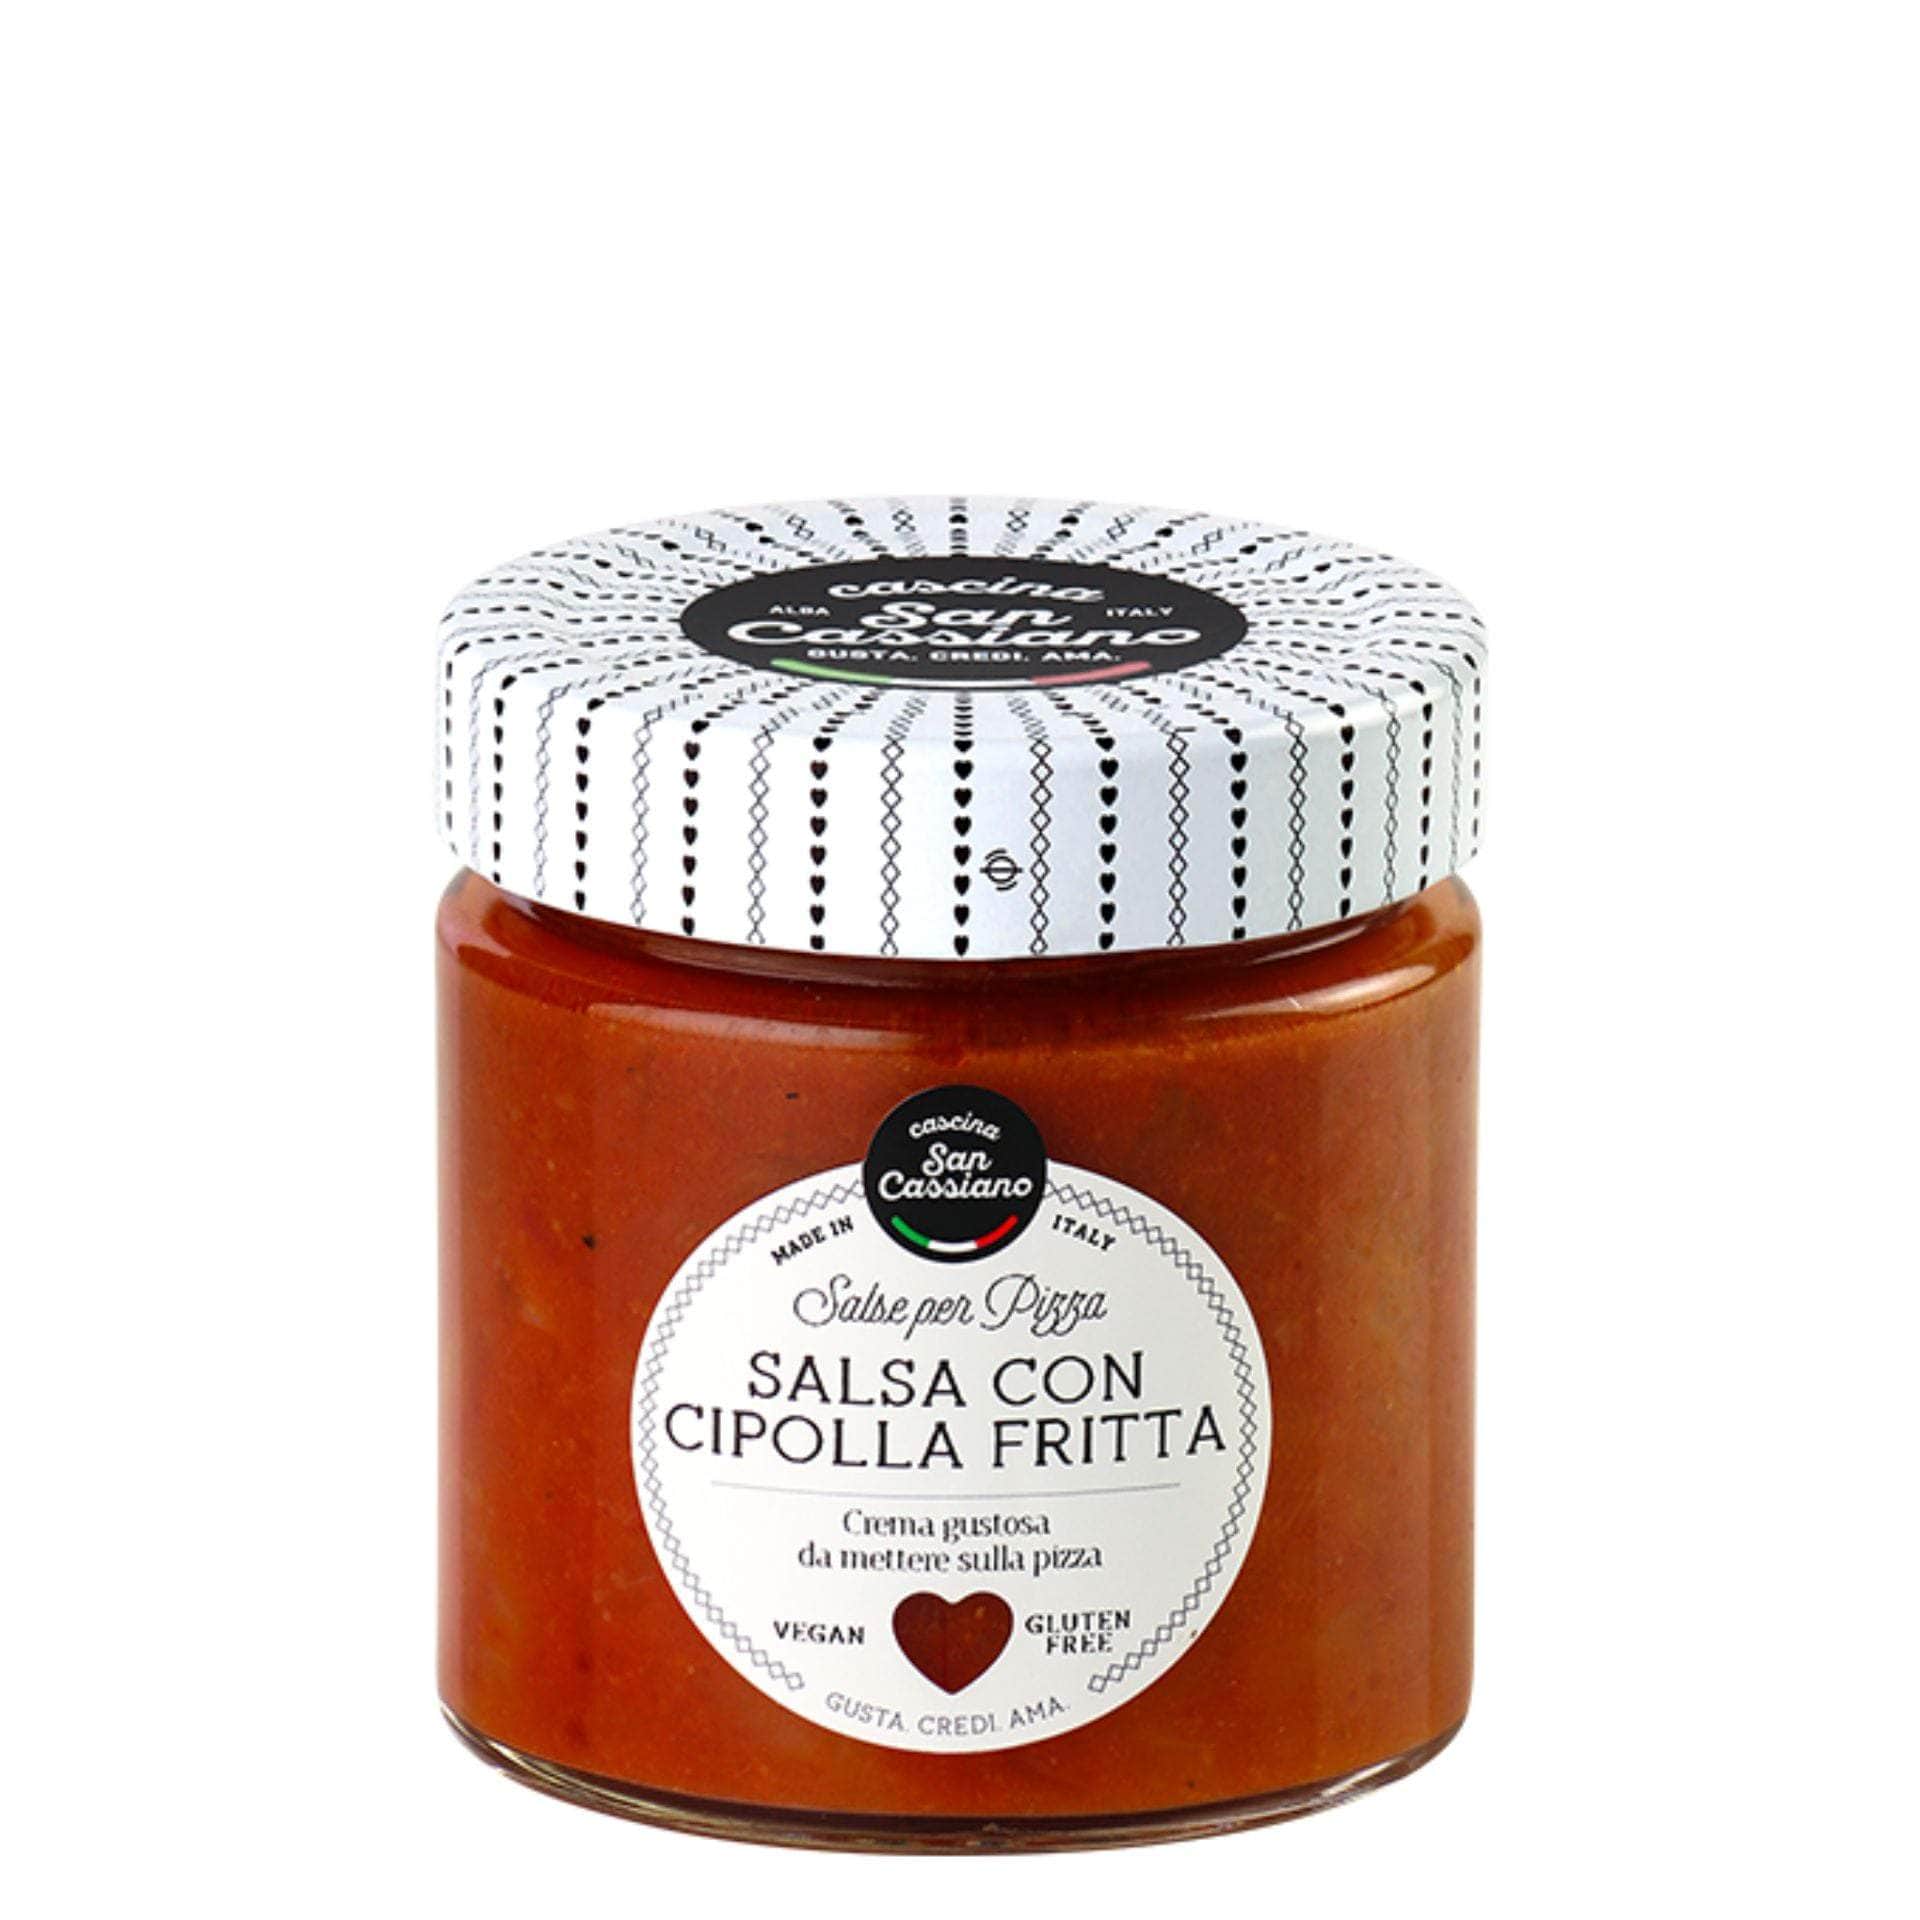 Tasty Ribbon Pizza Sauce with Fried Onions Caramel and salt pearls dipped in blond chocolate | Gourmet Authentic Products | SHOP ONLINE